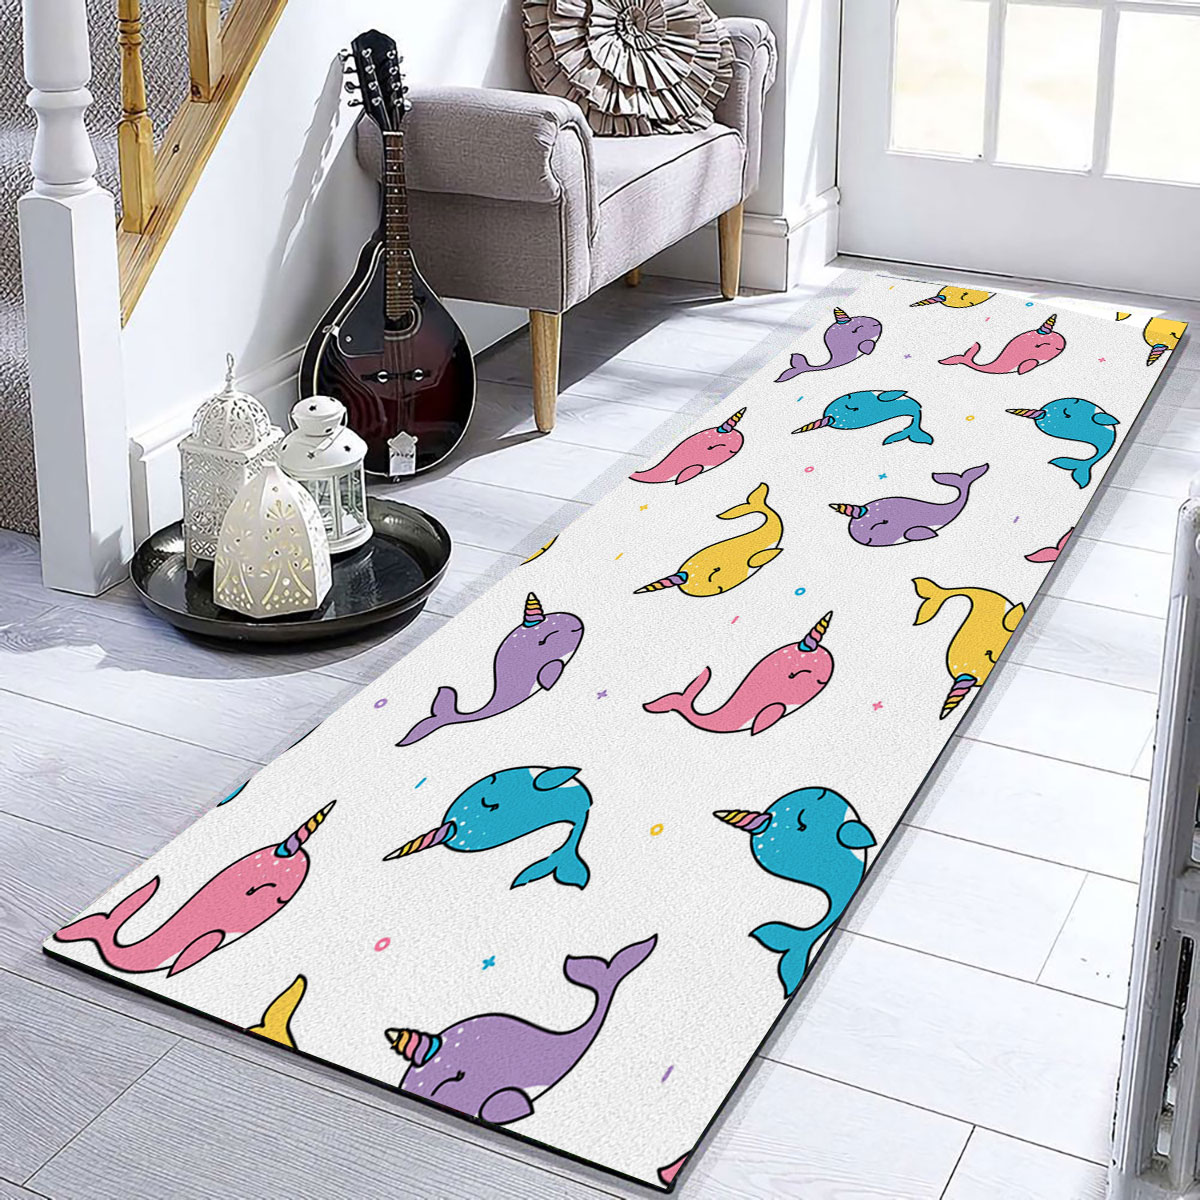 Colorful Happy Narwhal Runner Carpet